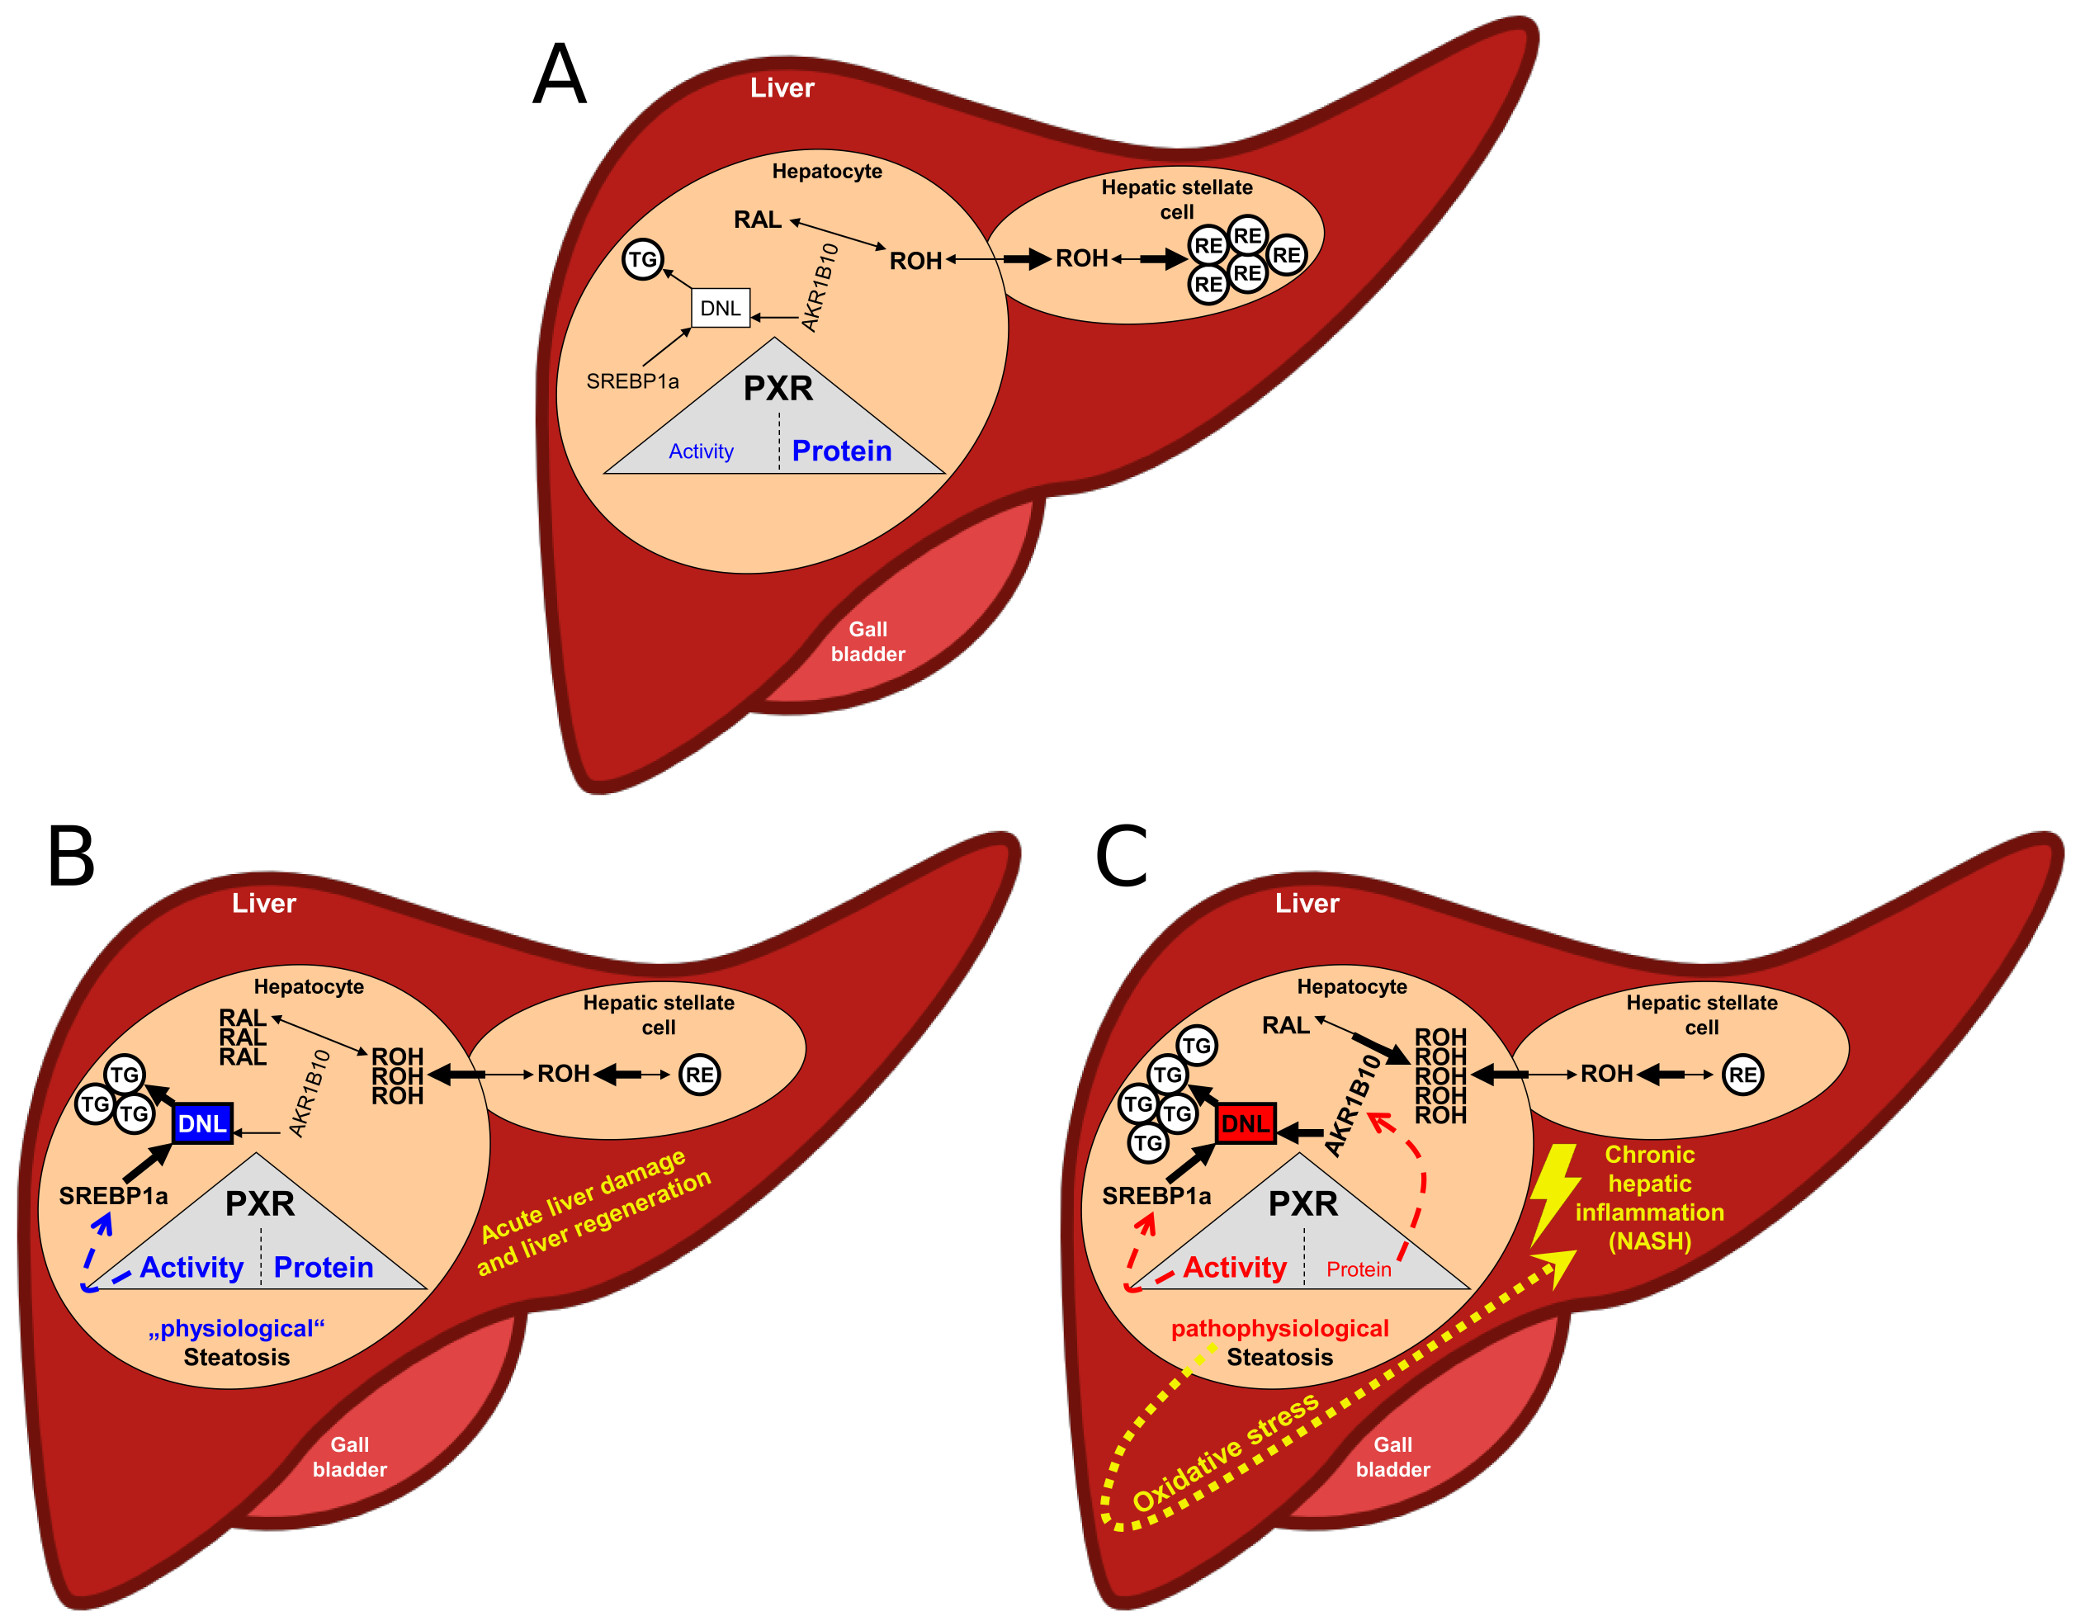 Figure 5: Hypothetical scheme of the physiological (B) and pathophysiological (C) PXR-dependent hepatic steatosis. A) Normal condition of the liver: low ligand-mediated PXR activity and high/stable protein content of PXR. RAL, retinal; ROH, retinol; RE, retinyl ester; TG, triglyceride; DNL, de novo lipogenesis. (for more details, see above)